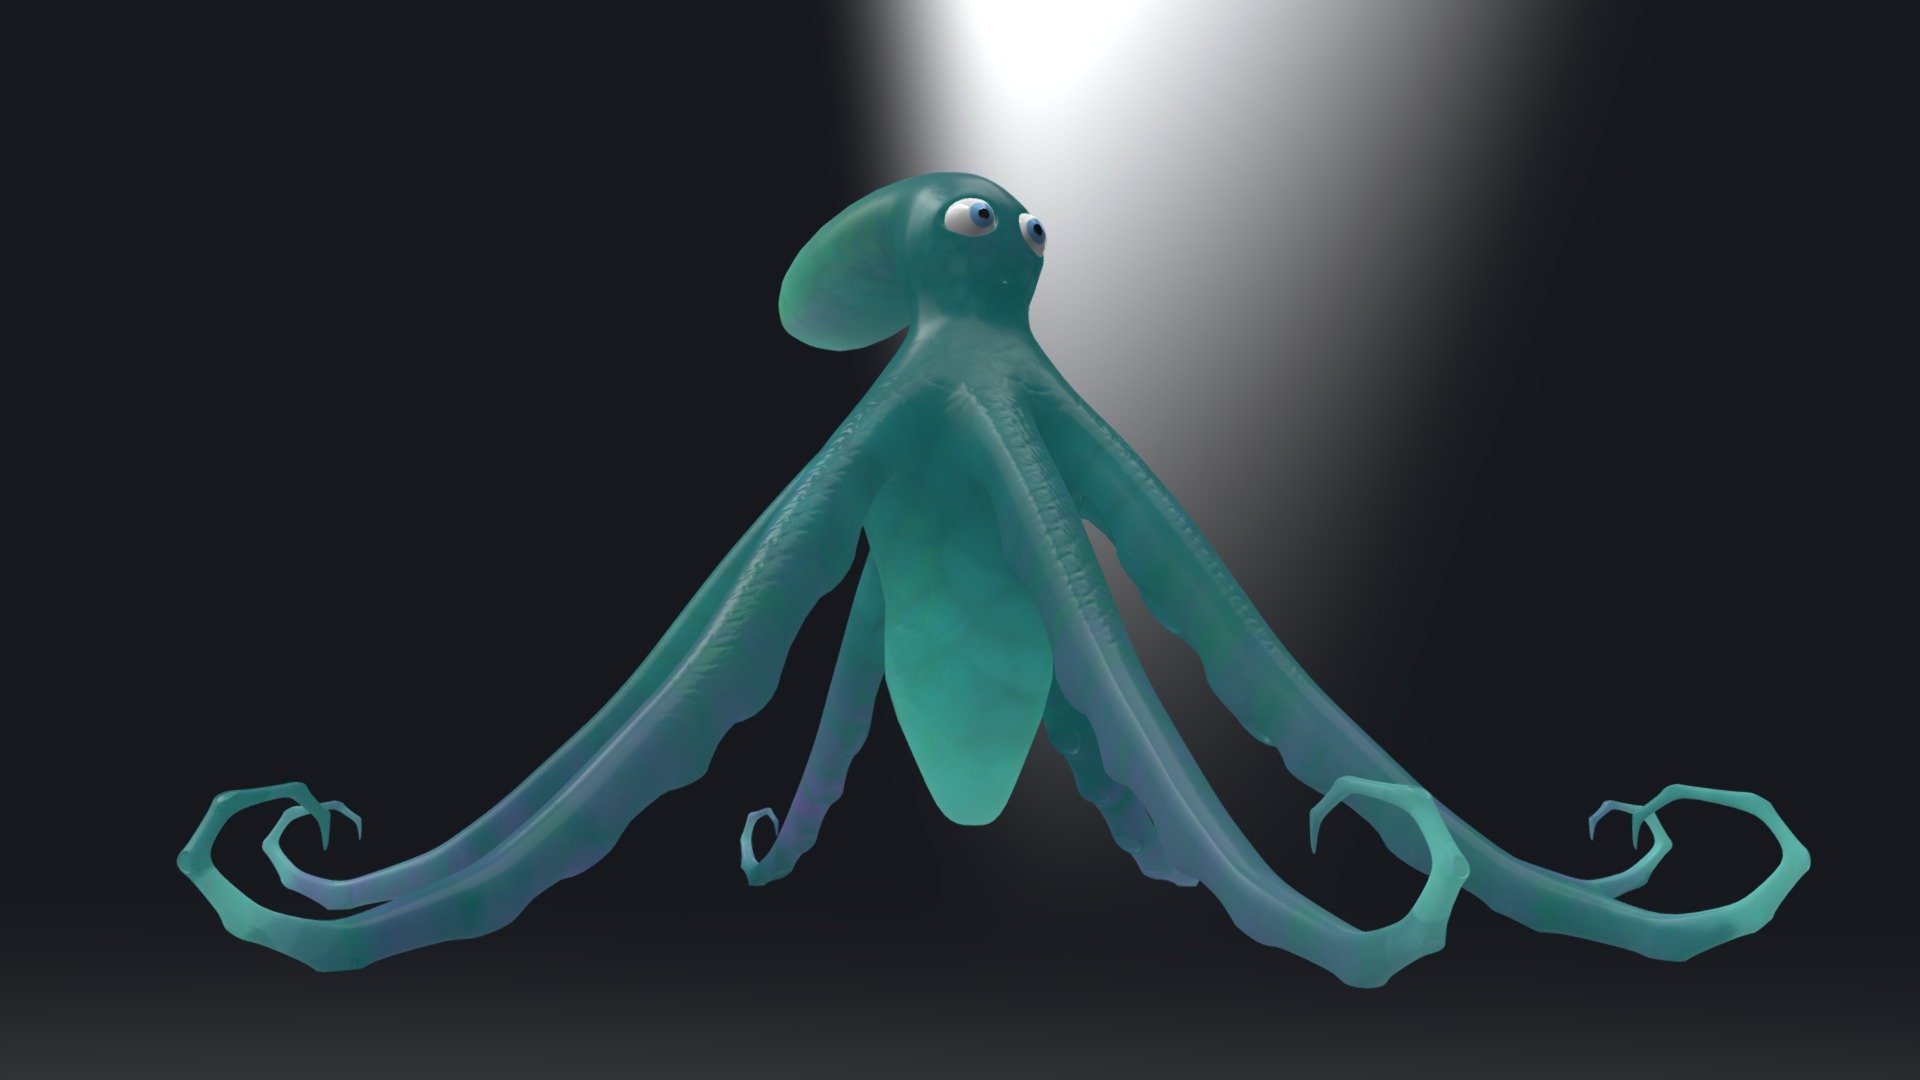 Fun Cartoon Squid with bubbly eyes.
modeled in 3ds max, textured in Zbrush - Cartoon Squid - Download Free 3D model by LAUM (@lauminet) 3d model